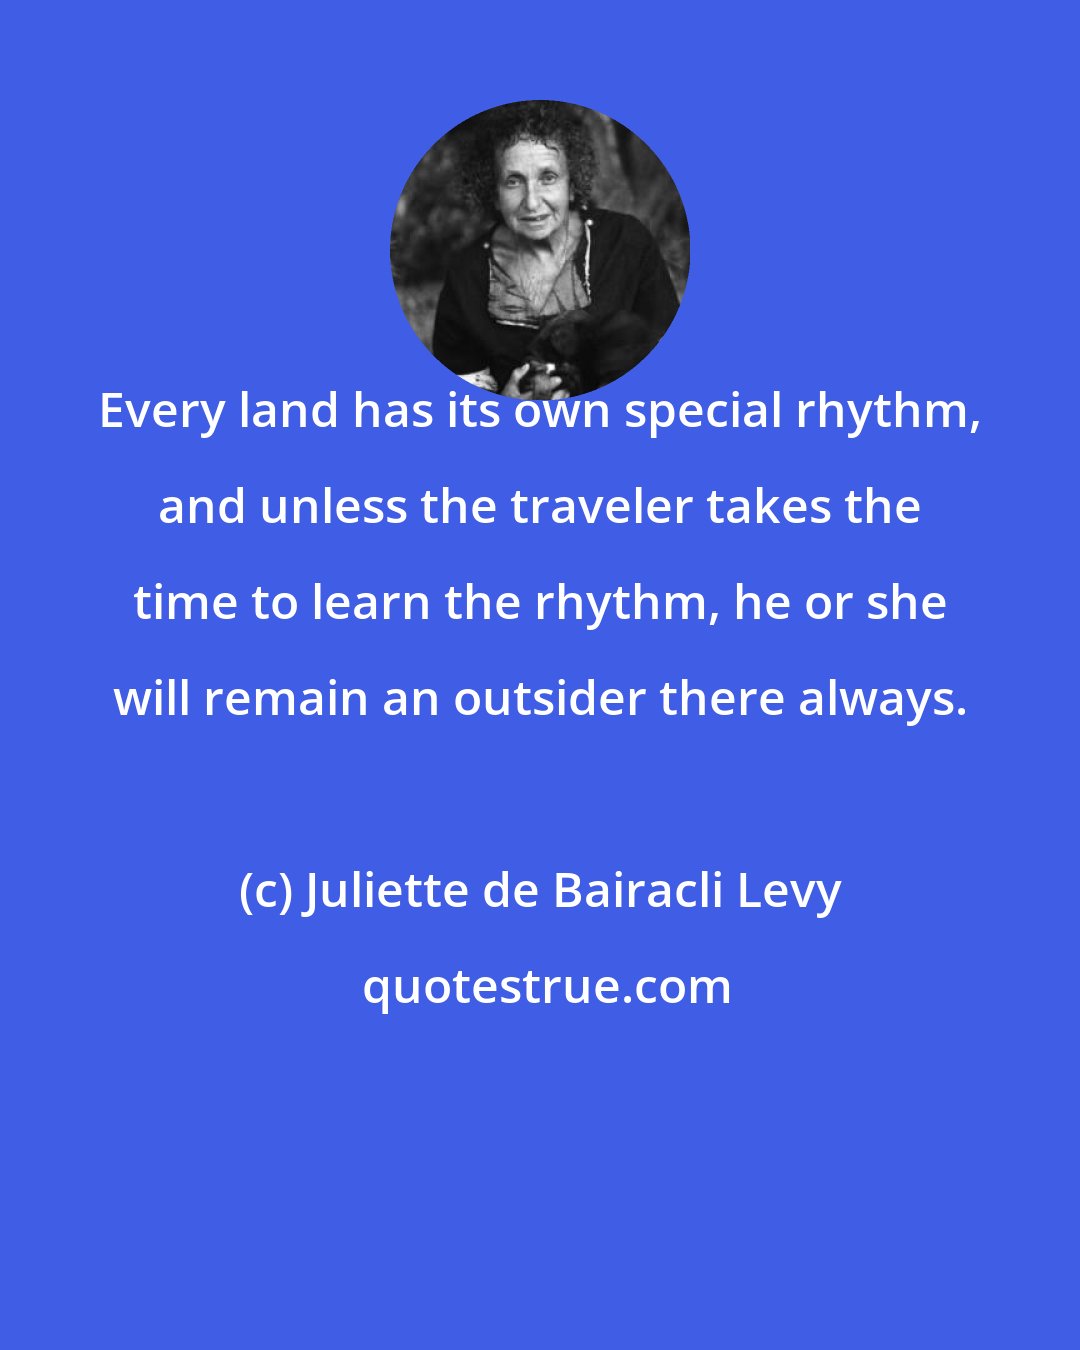 Juliette de Bairacli Levy: Every land has its own special rhythm, and unless the traveler takes the time to learn the rhythm, he or she will remain an outsider there always.